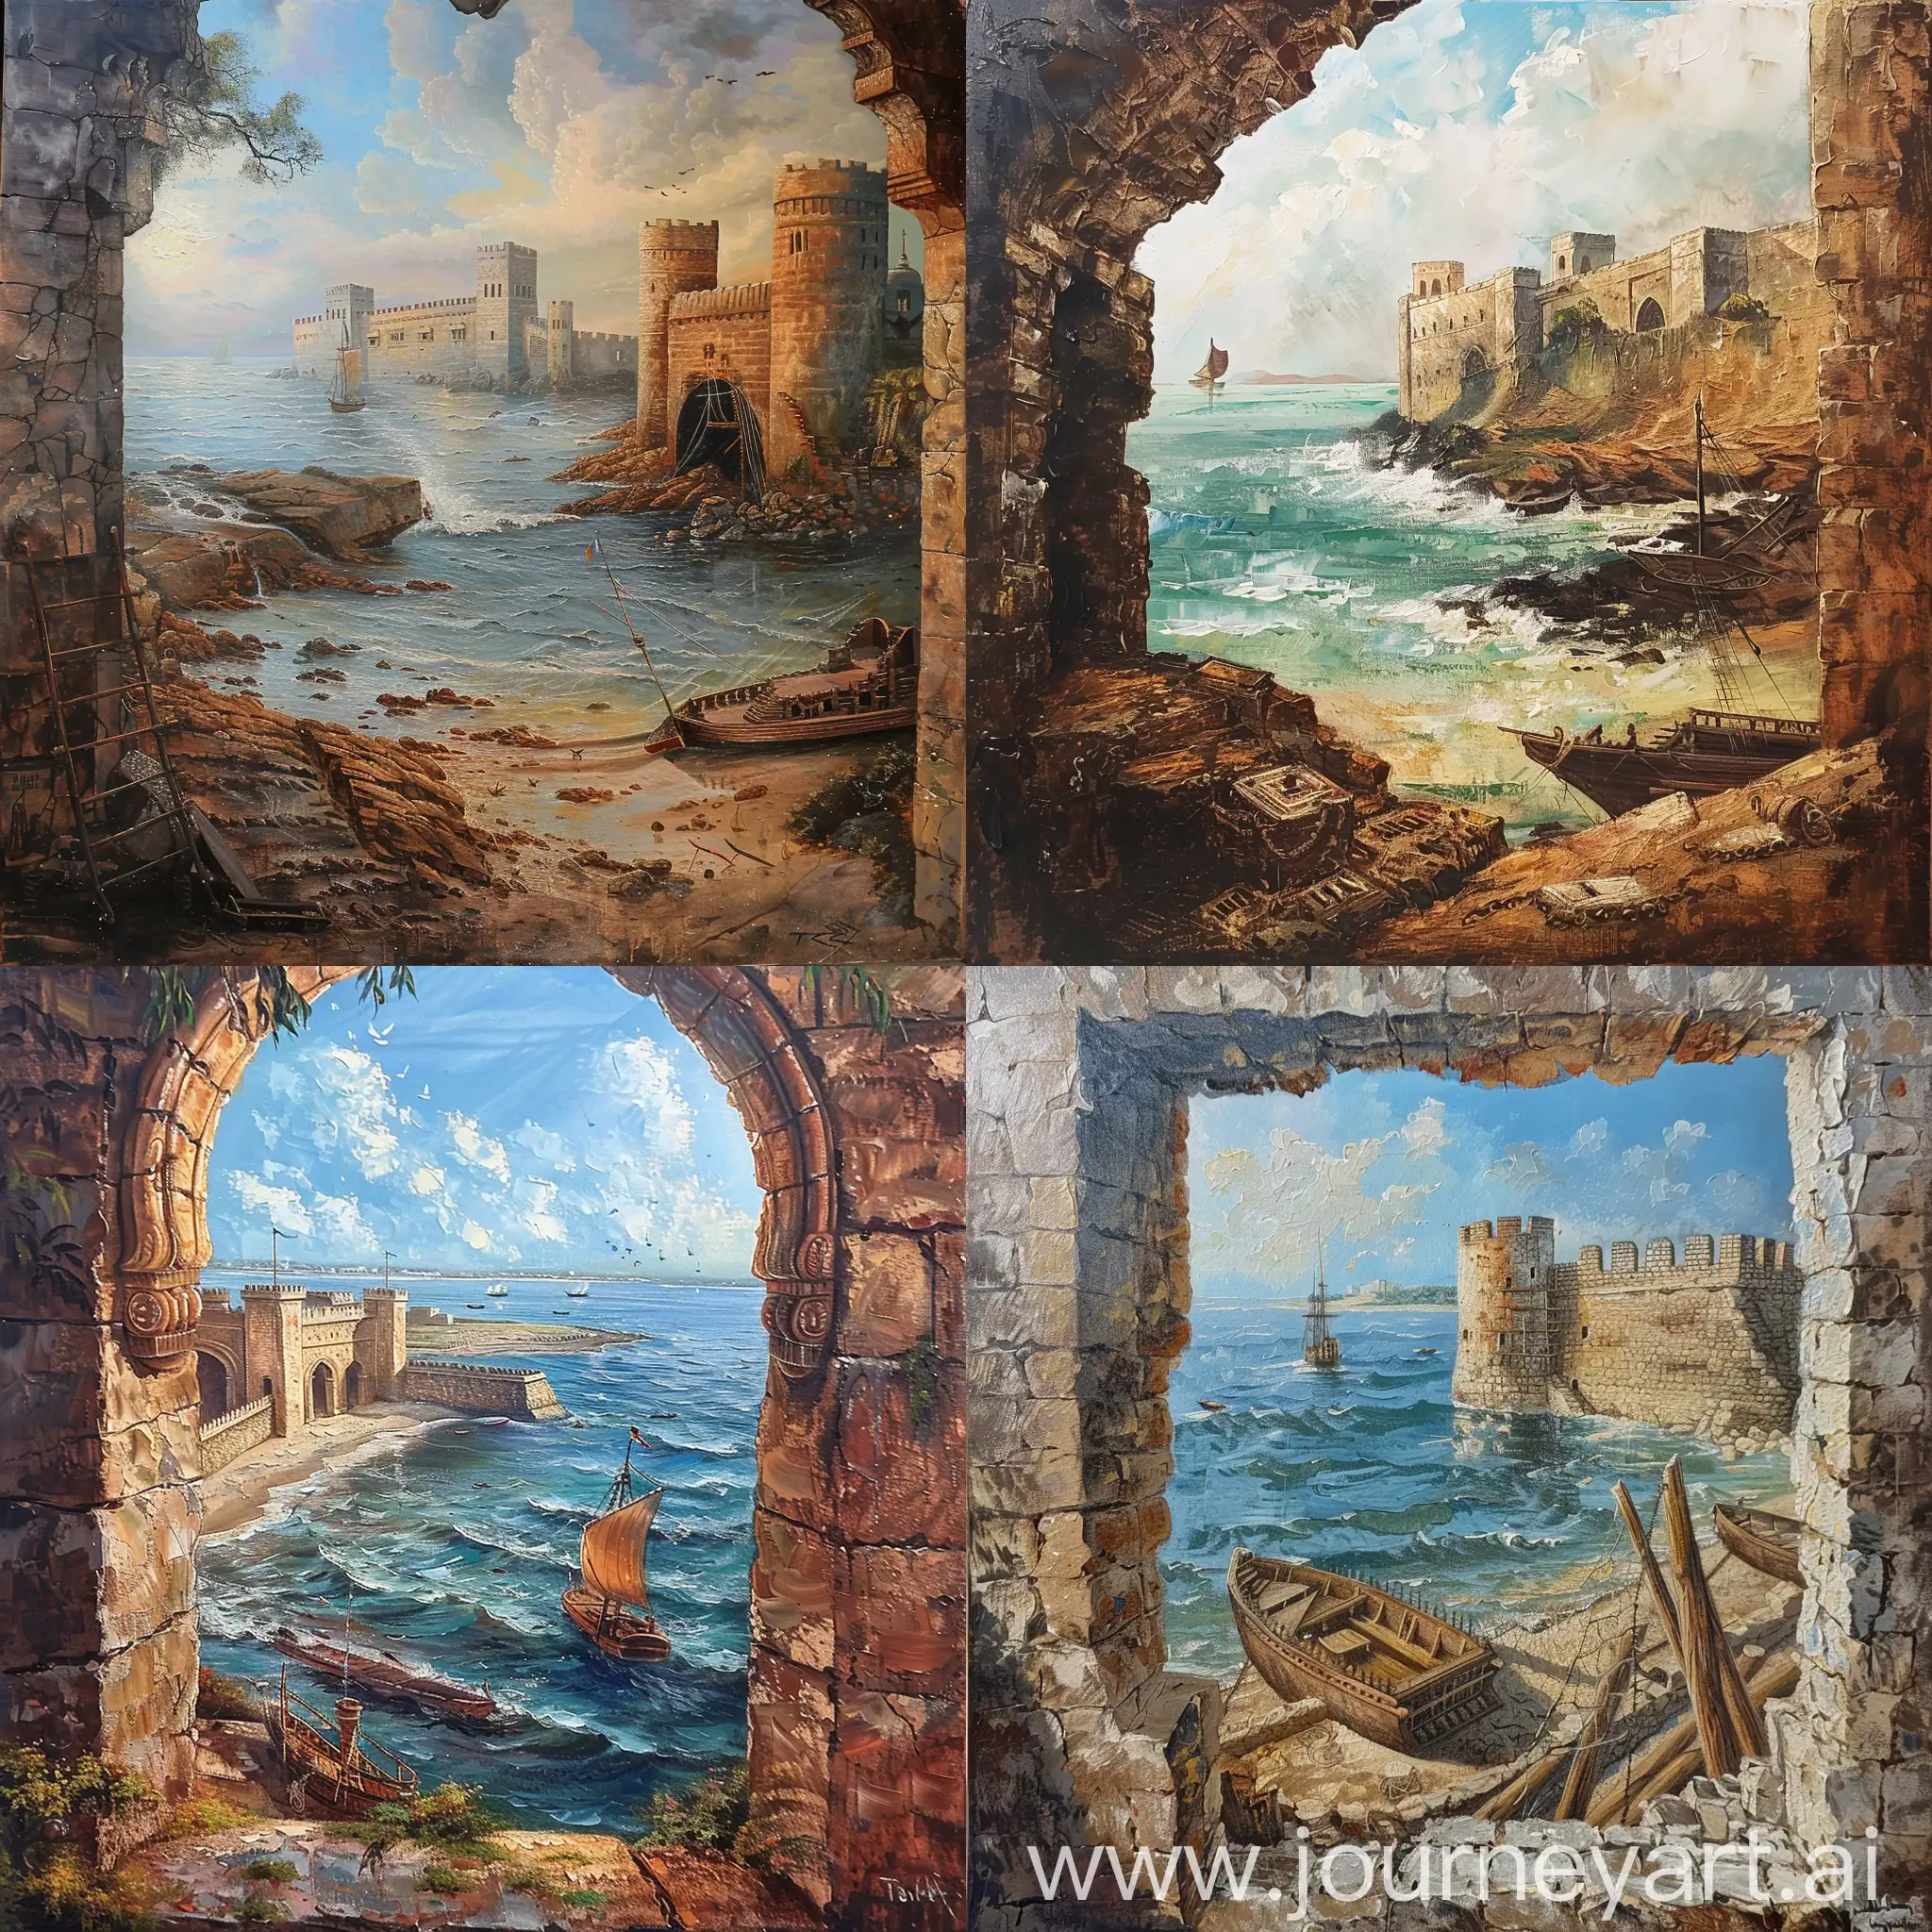 Beautiful painting of famous fort bekel fort in kasaragod, the fort and sea should be evident in the painting, a portion of ancient ship should be there, the total frame should look like an ancient painting
